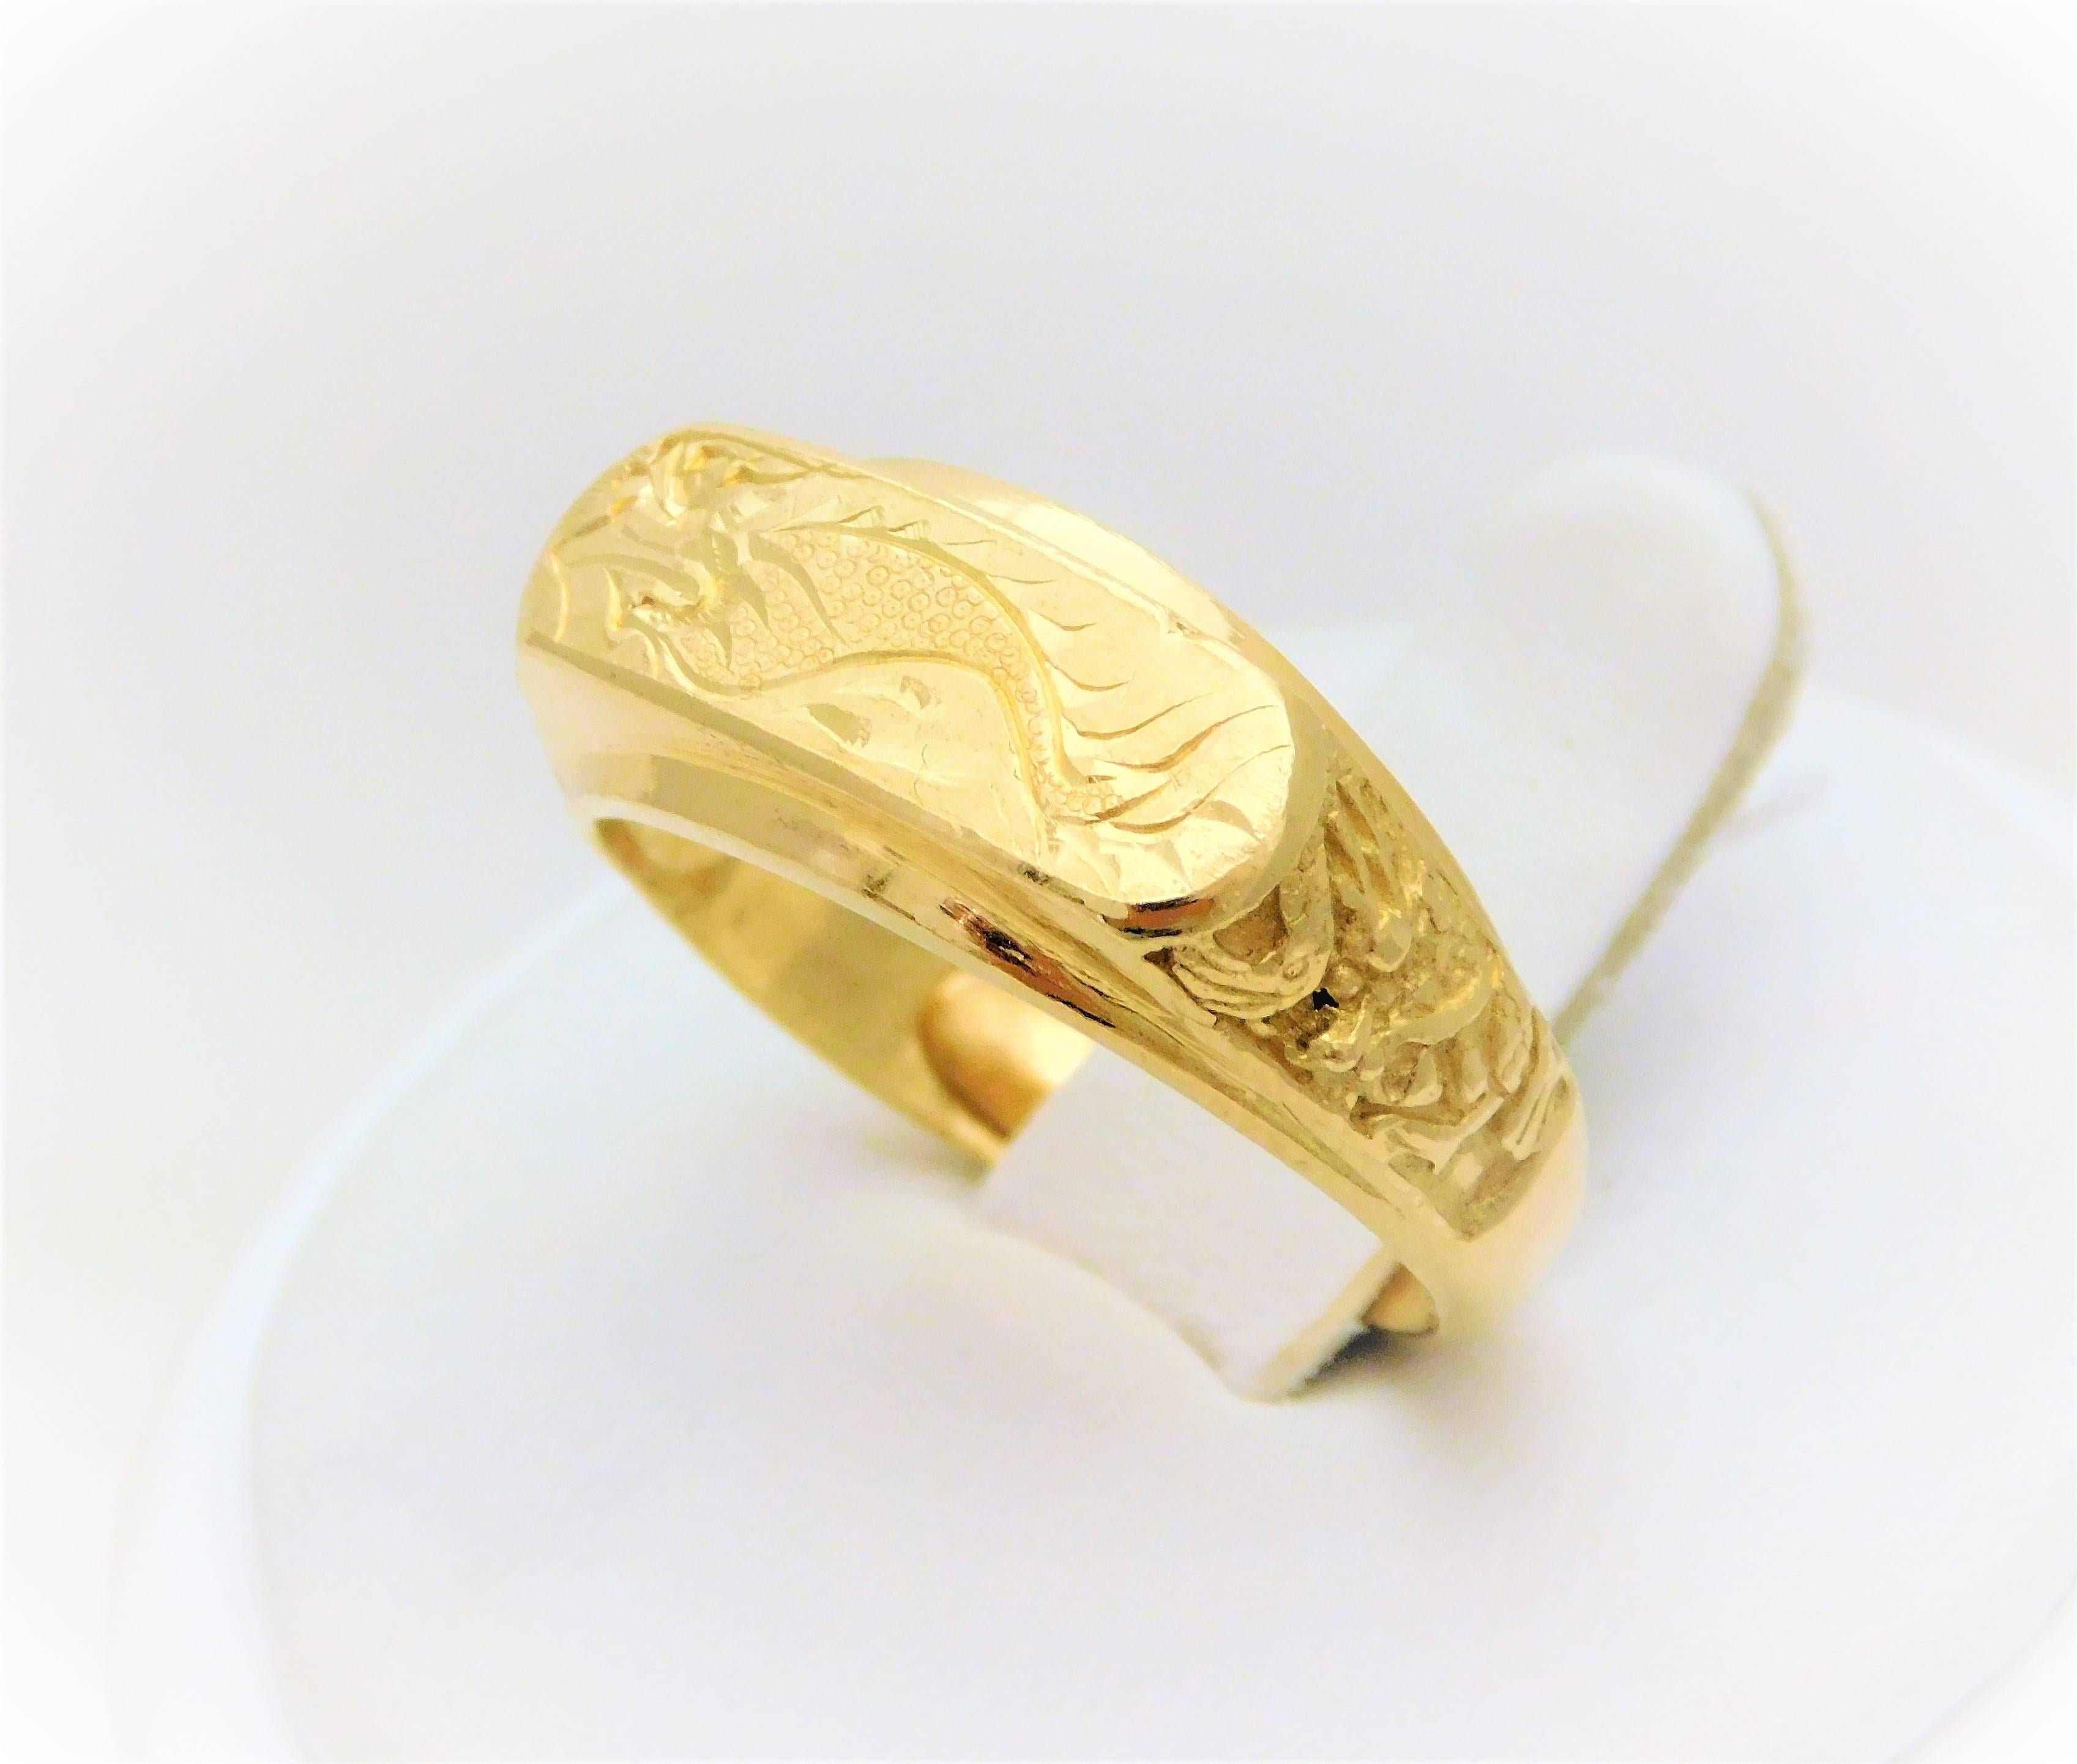 From a Chinese estate.  Circa 1940-1960.  This magnificent ring has been hand crafted in solid 23k yellow gold.  It features all original hand engravings including the exceptionally detailed dragon design on the front of the head.  All of the